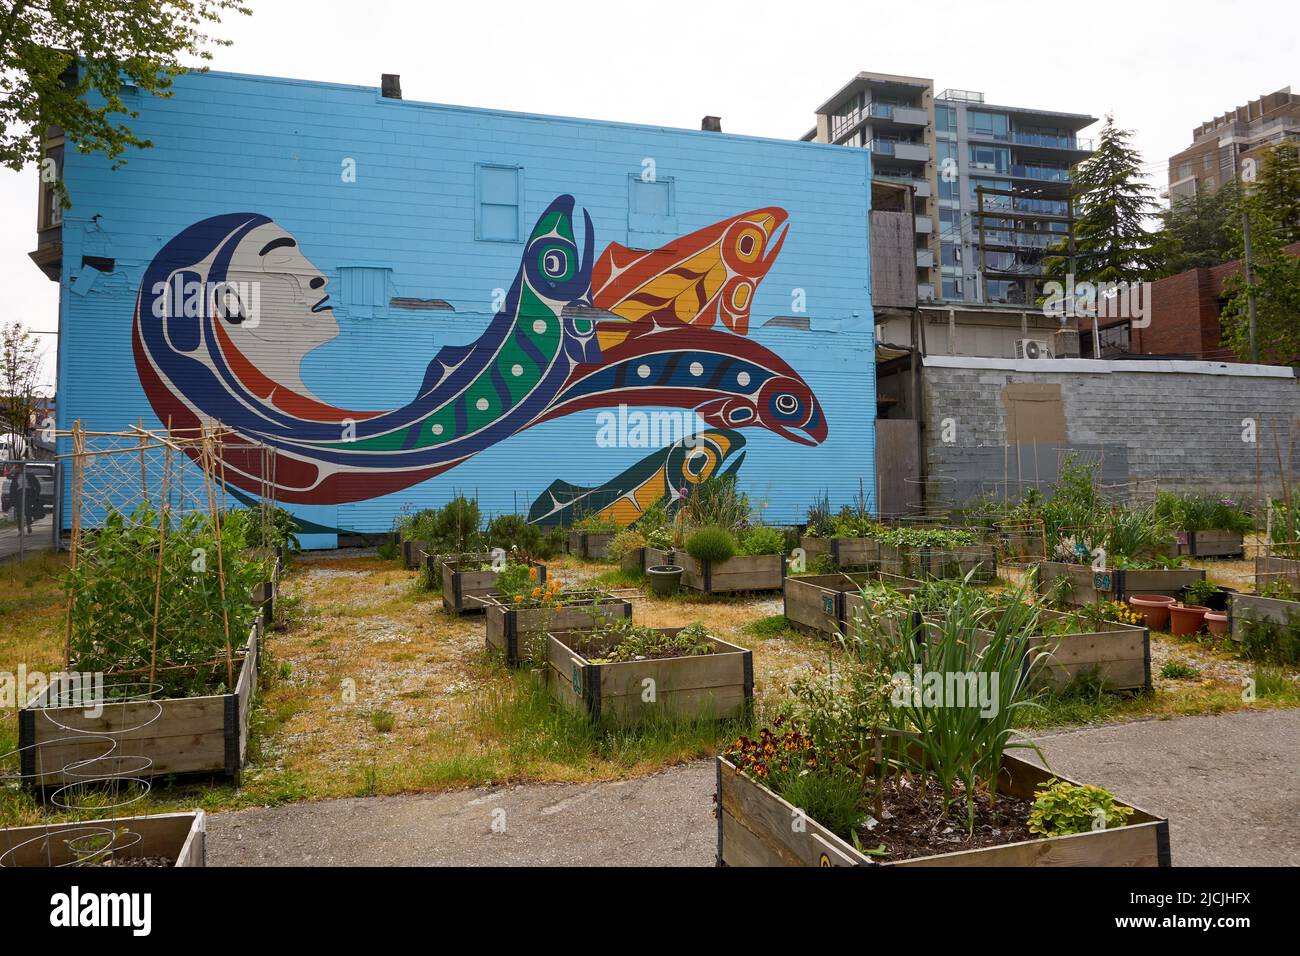 A community garden in the South Granville neighbourhood of Vancouver, BC, Canada Stock Photo